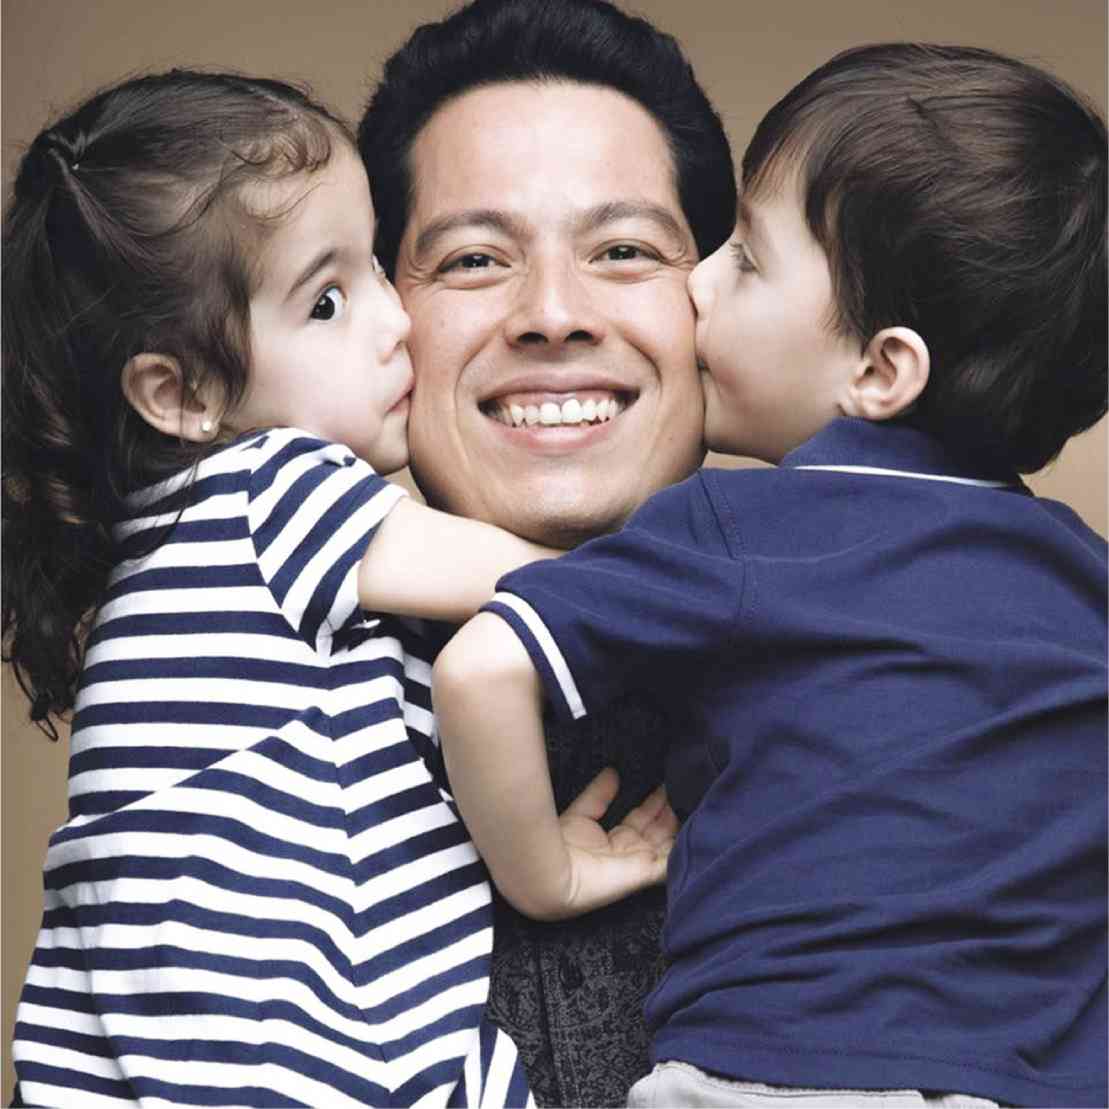 JON-JON Rufino with his twins, Lilith and Lucian